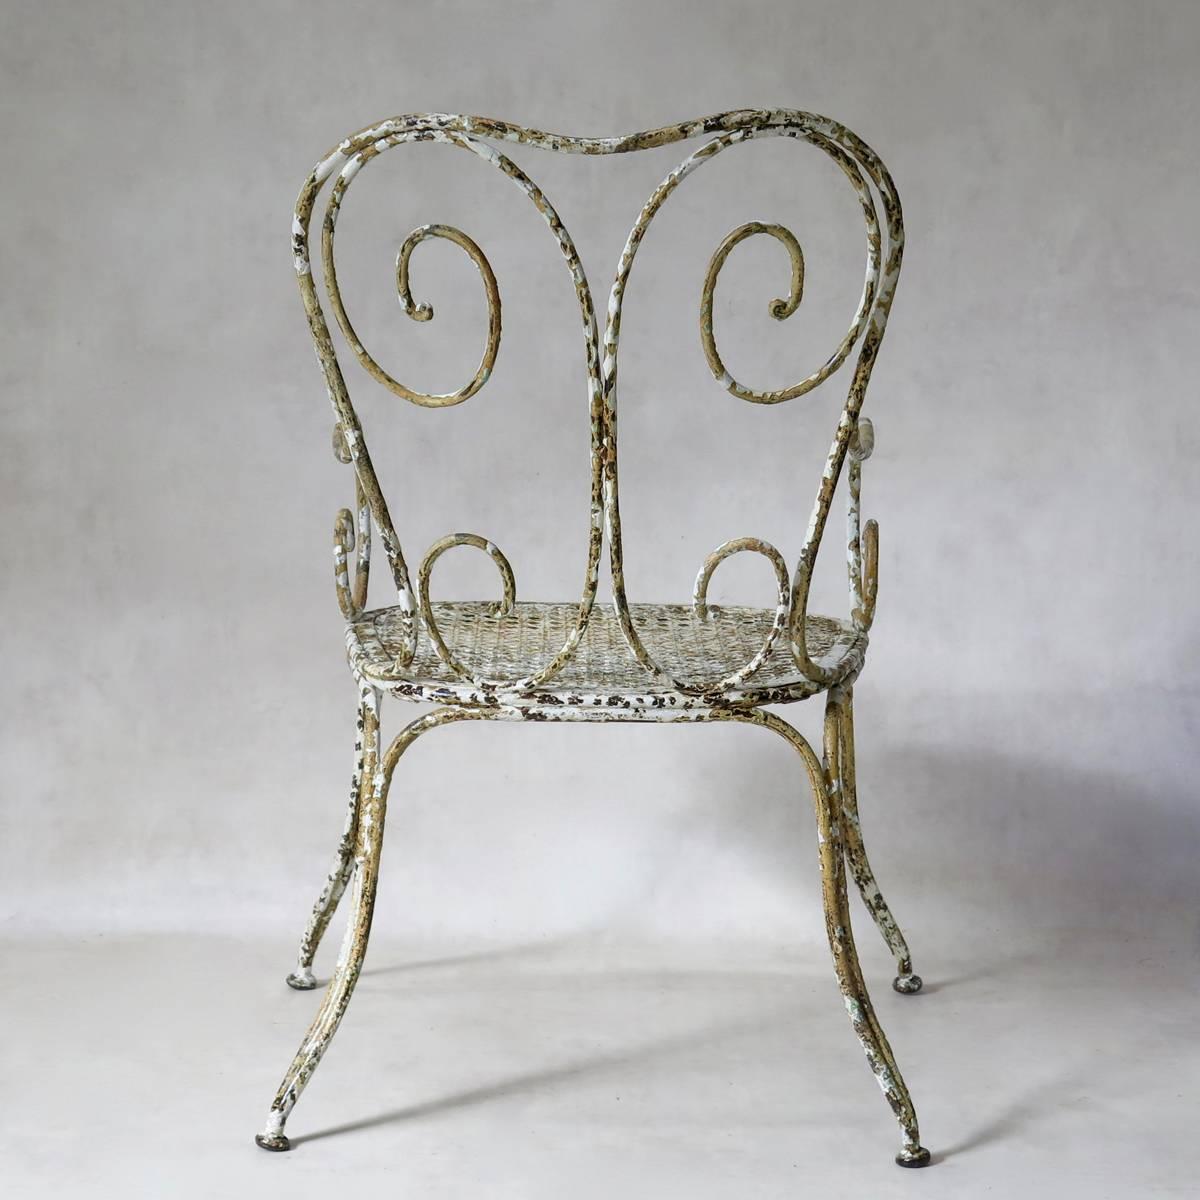 Painted Large Wrought Iron Chair, France, circa 1900